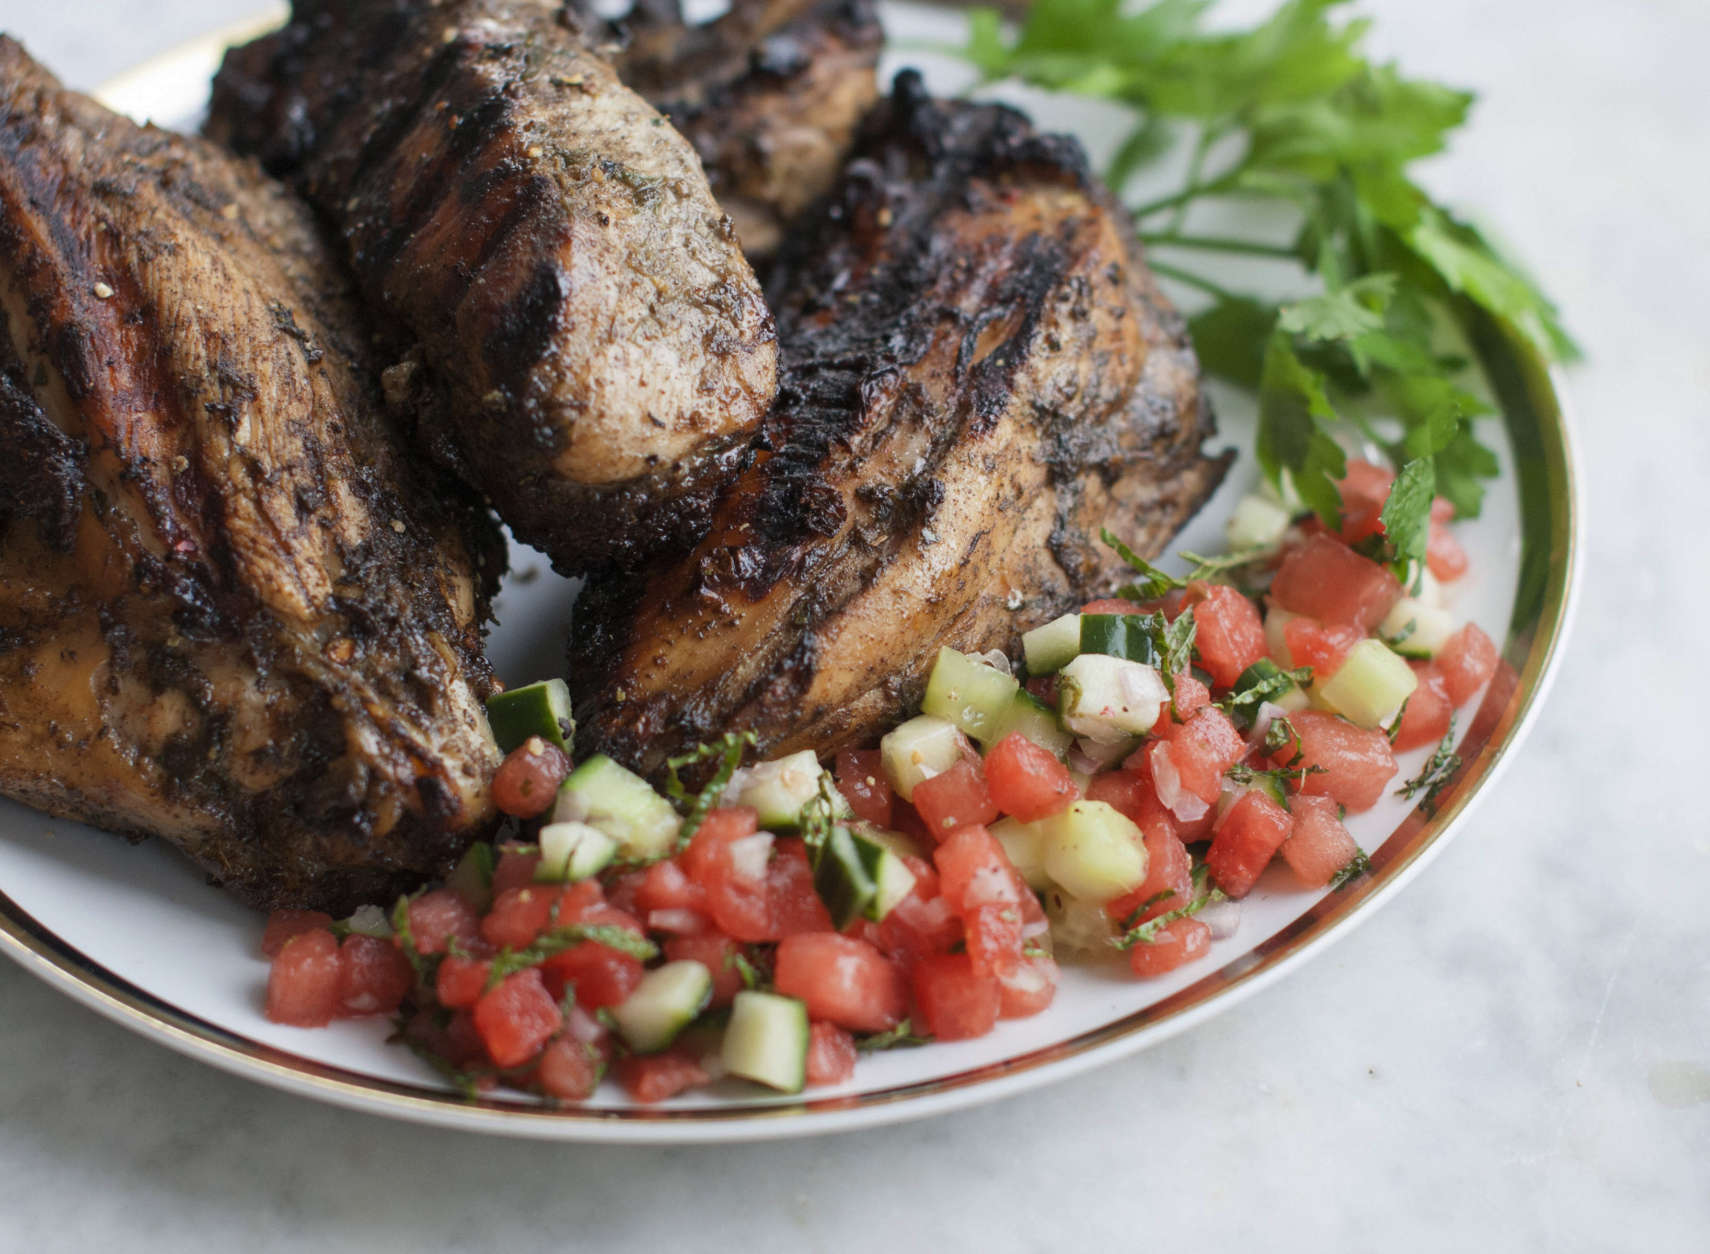 This April 14, 2014 photo shows grilled jerk chicken breast with watermelon salsa in Concord, N.H. Jerk refers both to a unique blend of seasonings and to a method of slow cooking. (AP Photo/Matthew Mead)